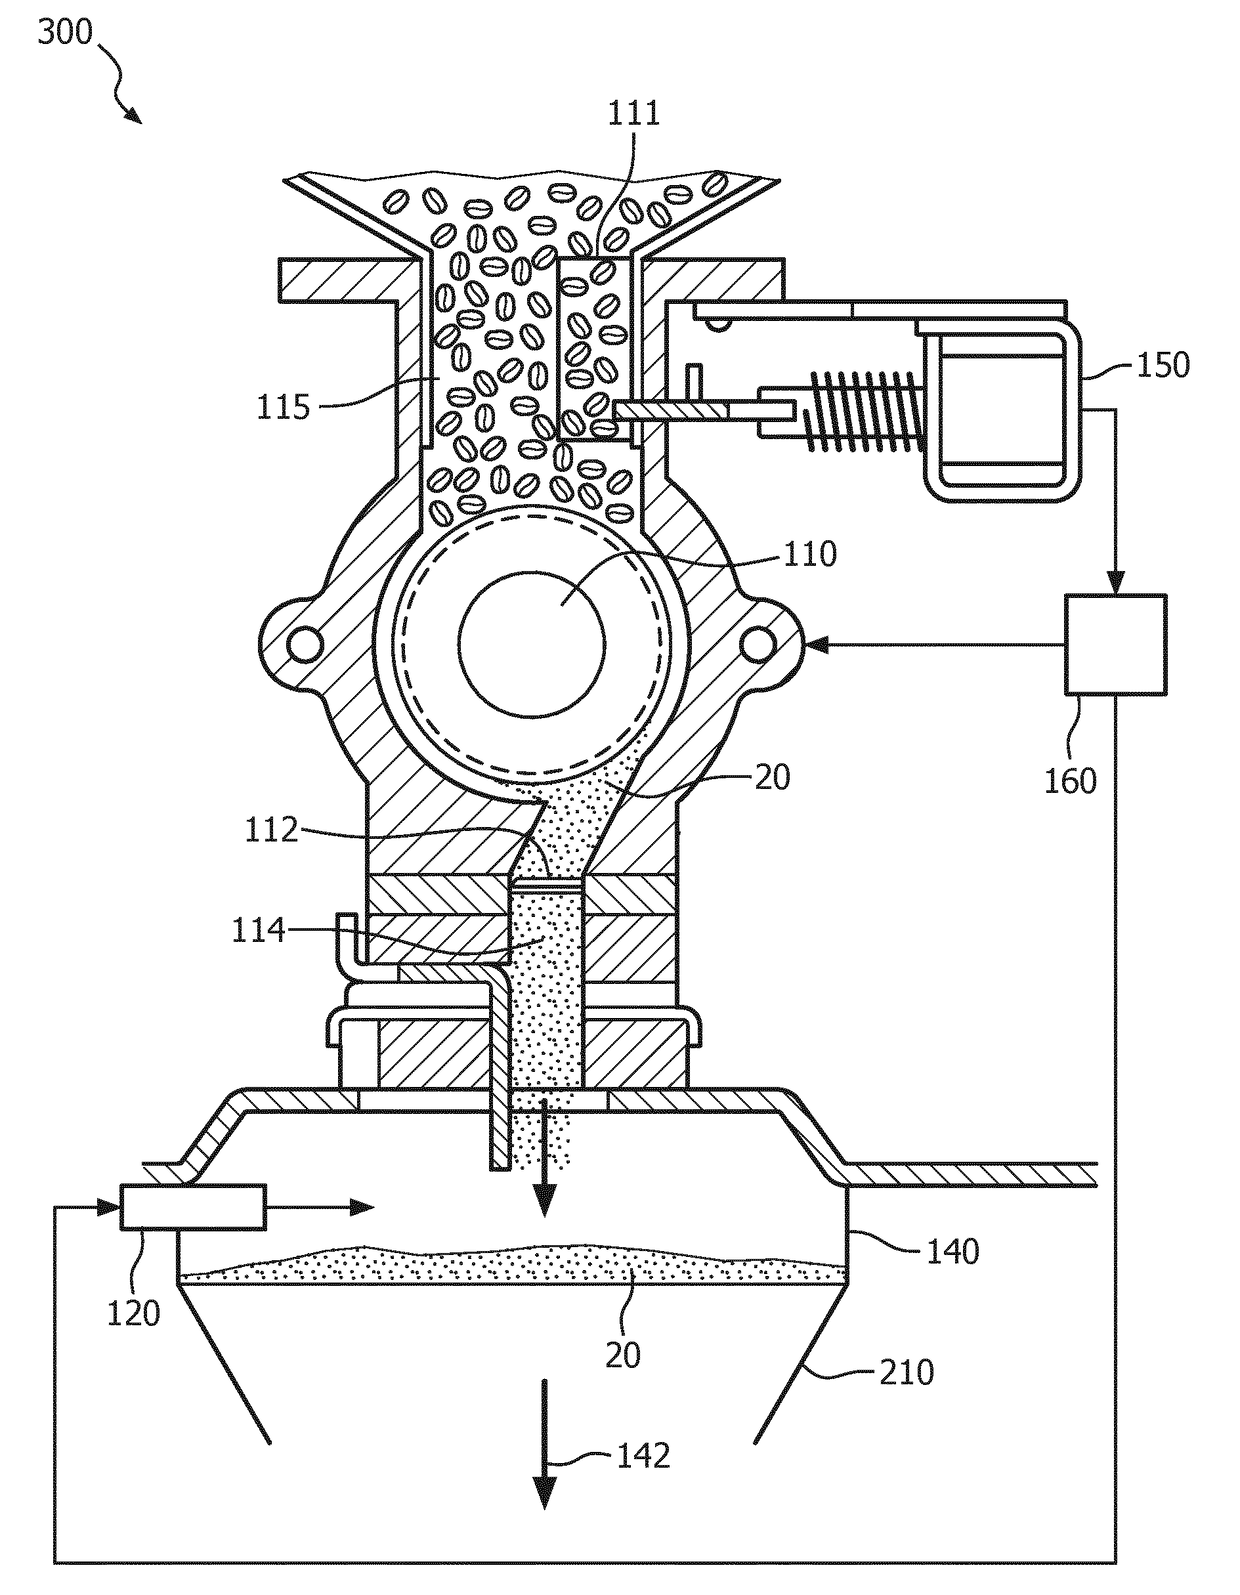 Coffee processing apparatus and method